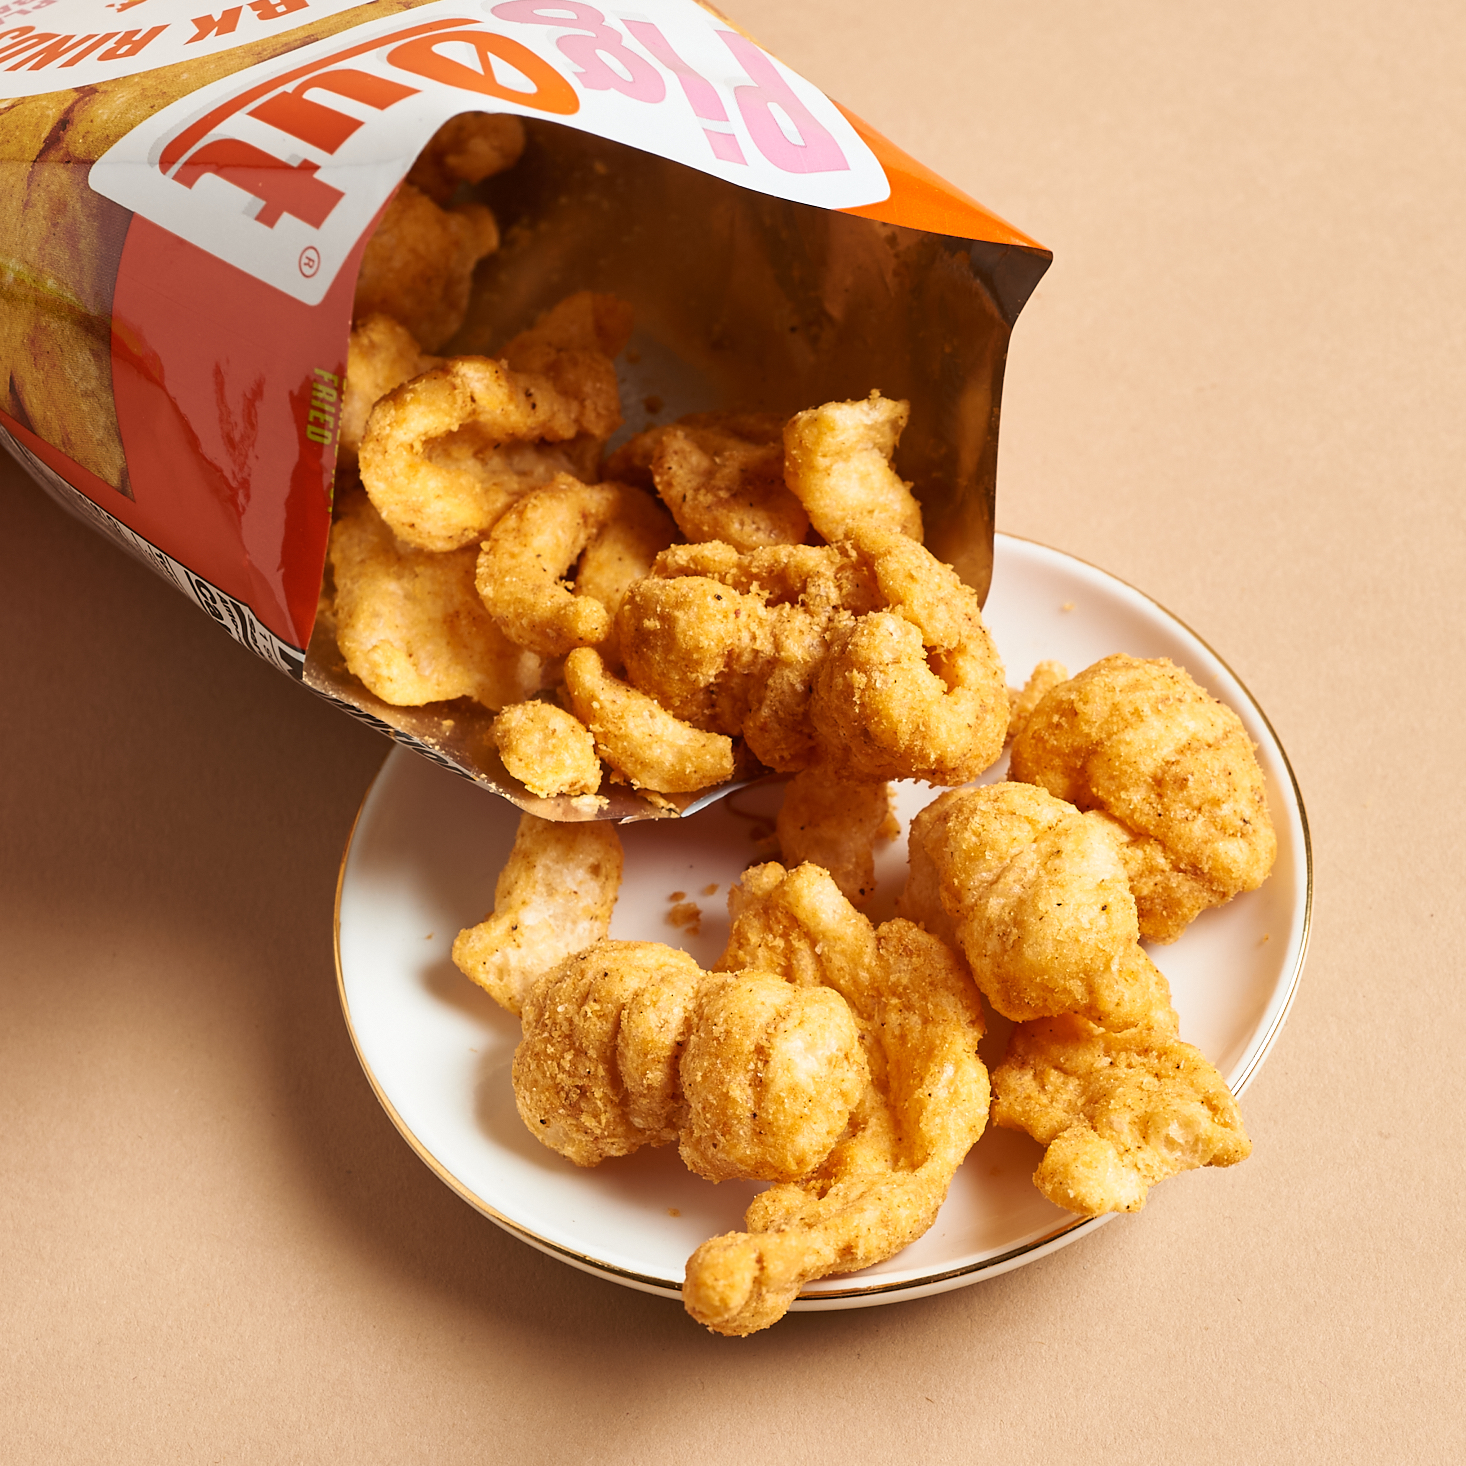 pigout pigless pork rinds package open with chips falling out